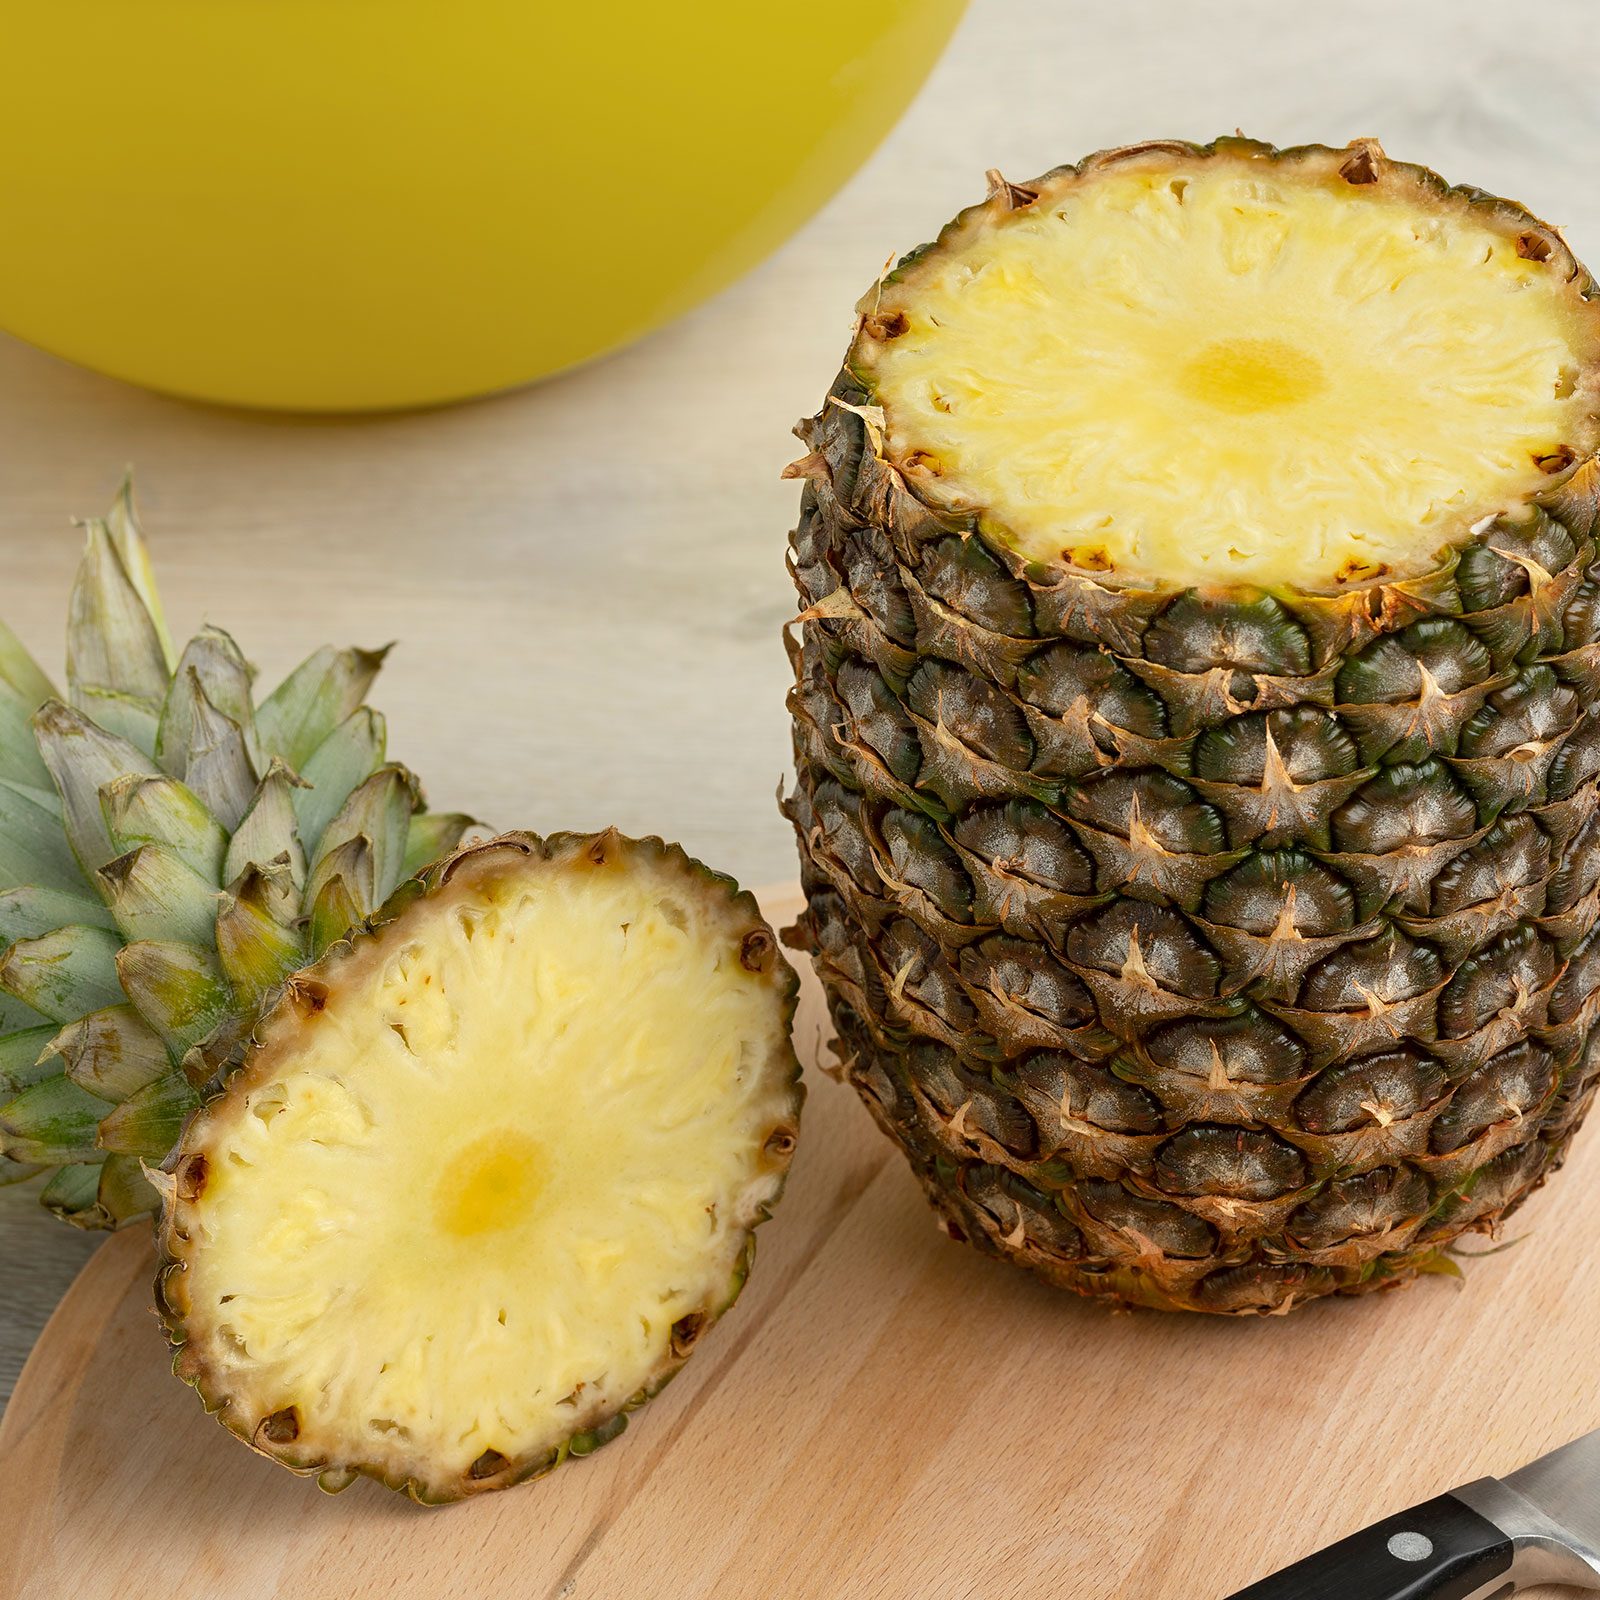 Fresh Tropical Pineapple with top cut off On A Cuttingboard